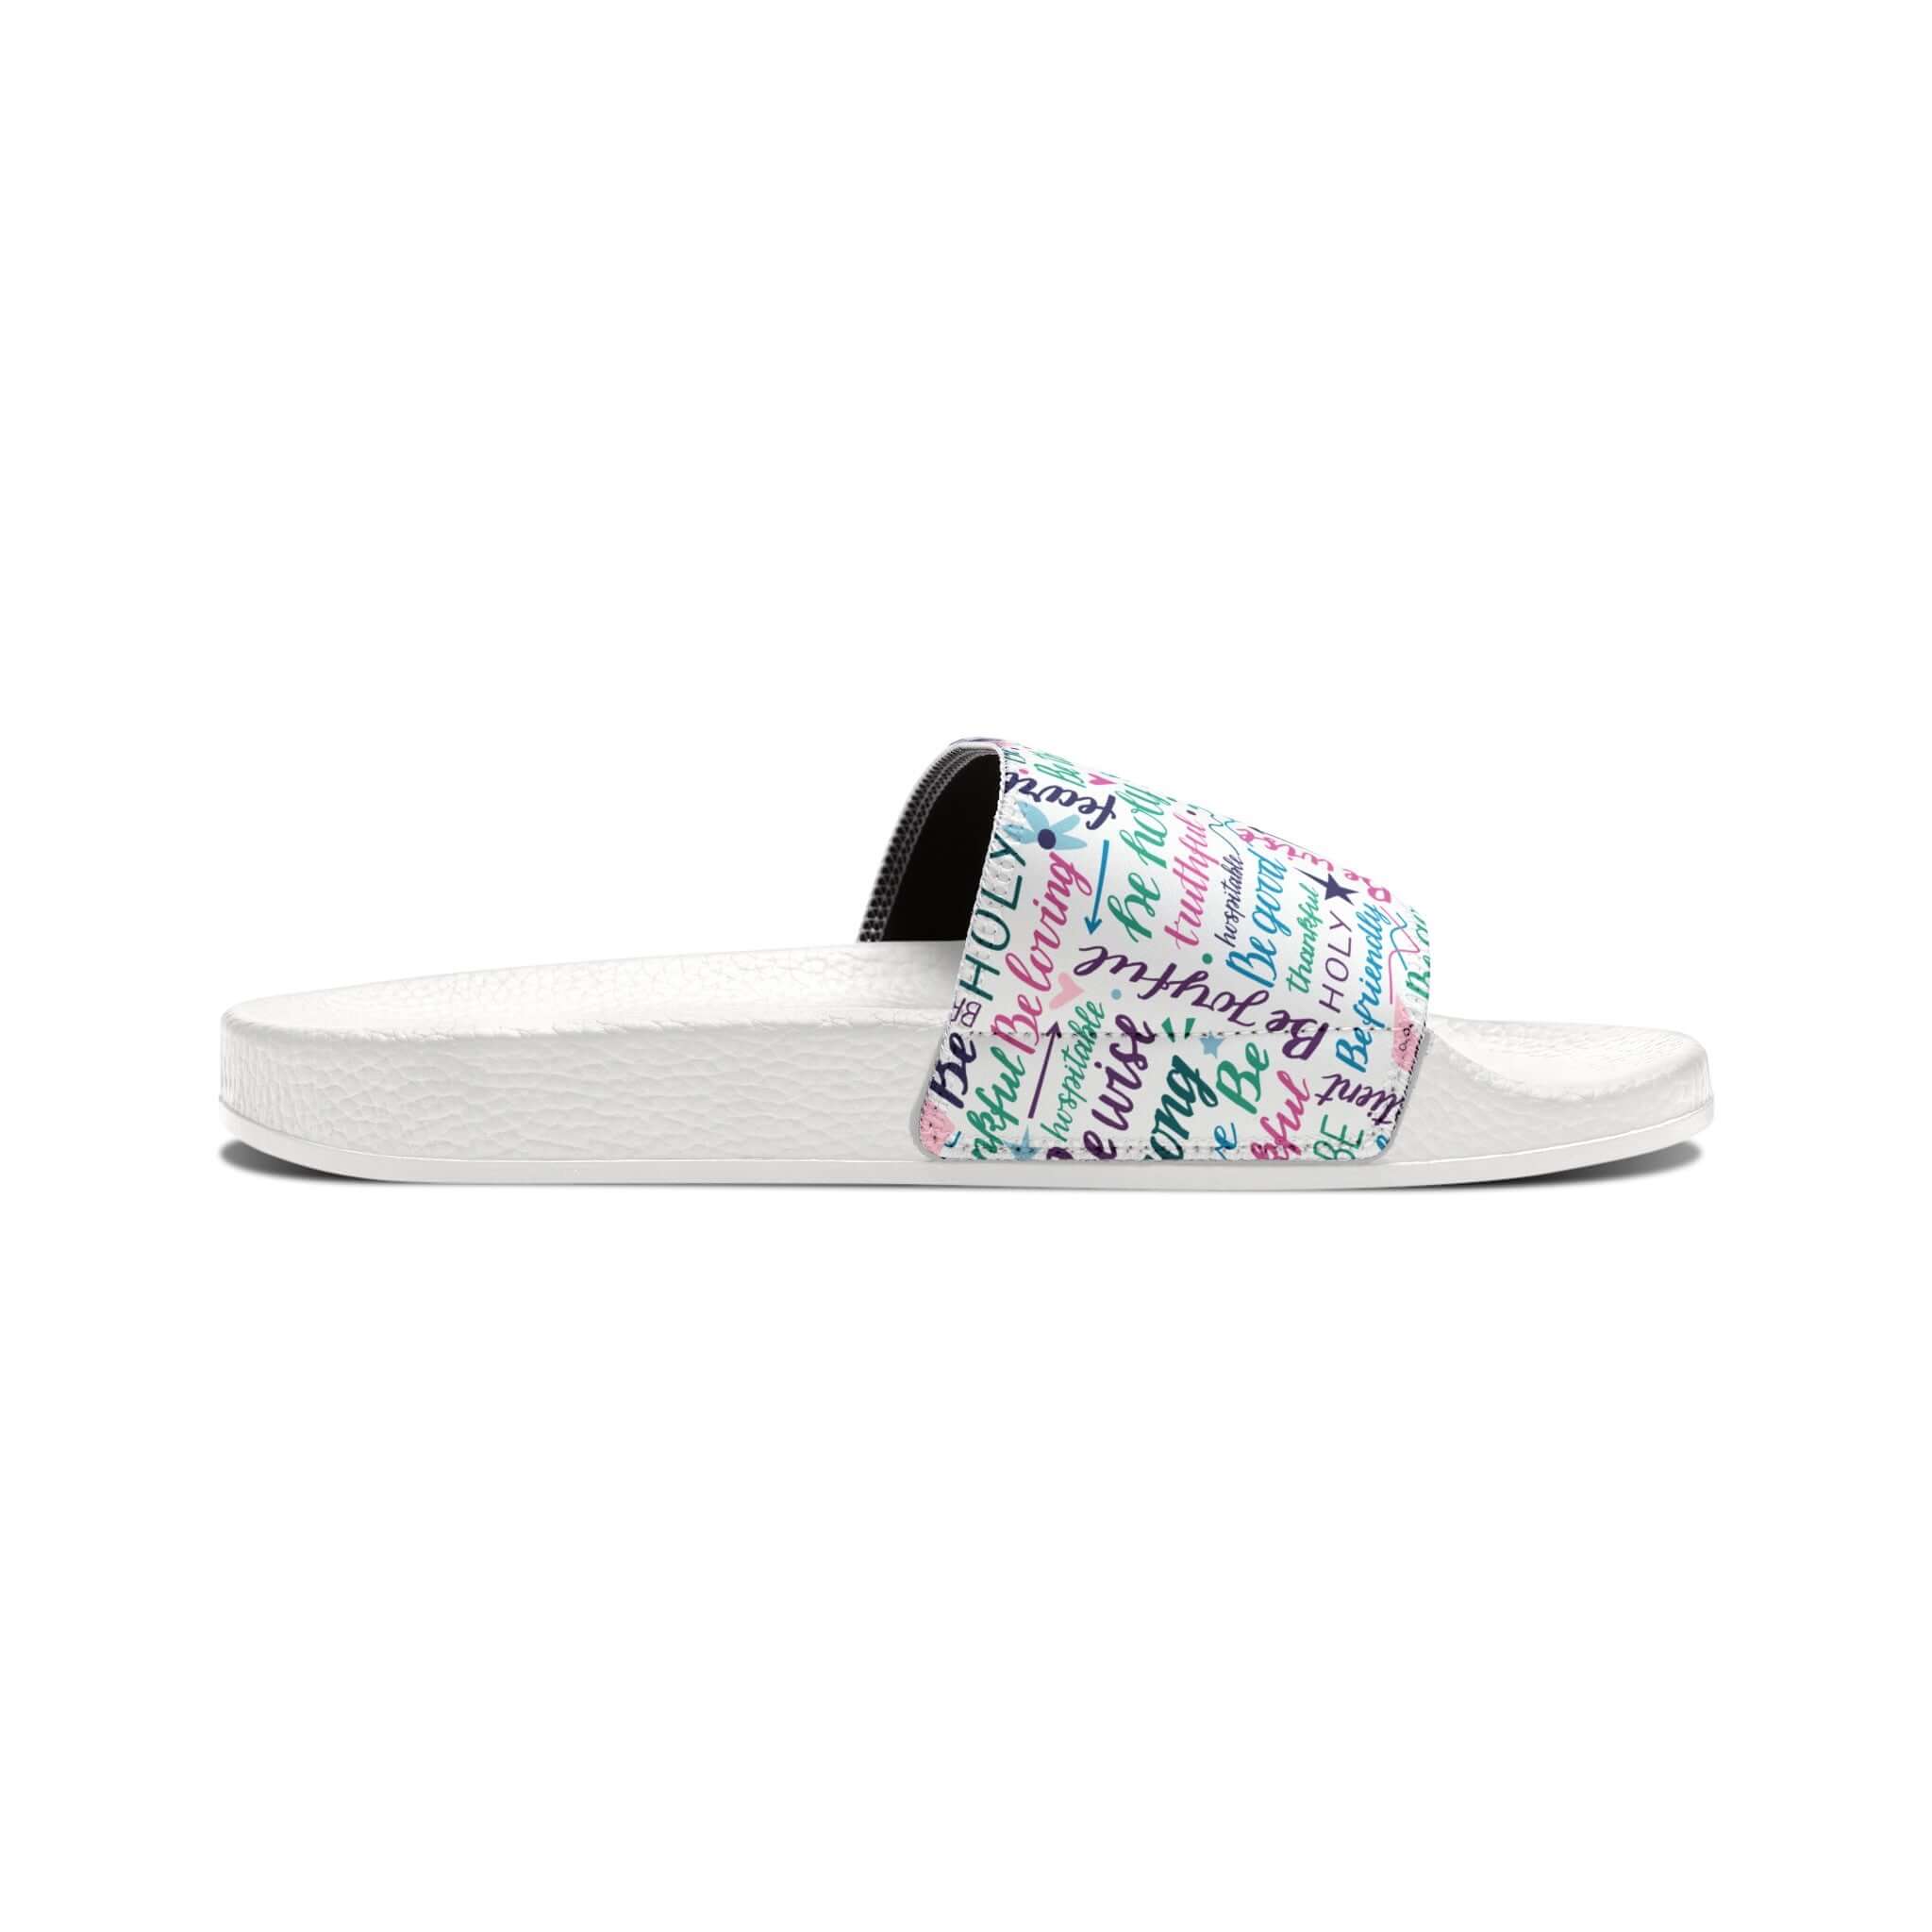 Be Strong Be Wise Affirmations Youth PU Slide Sandals Color: White Size: Kid's 13 Jesus Passion Apparel